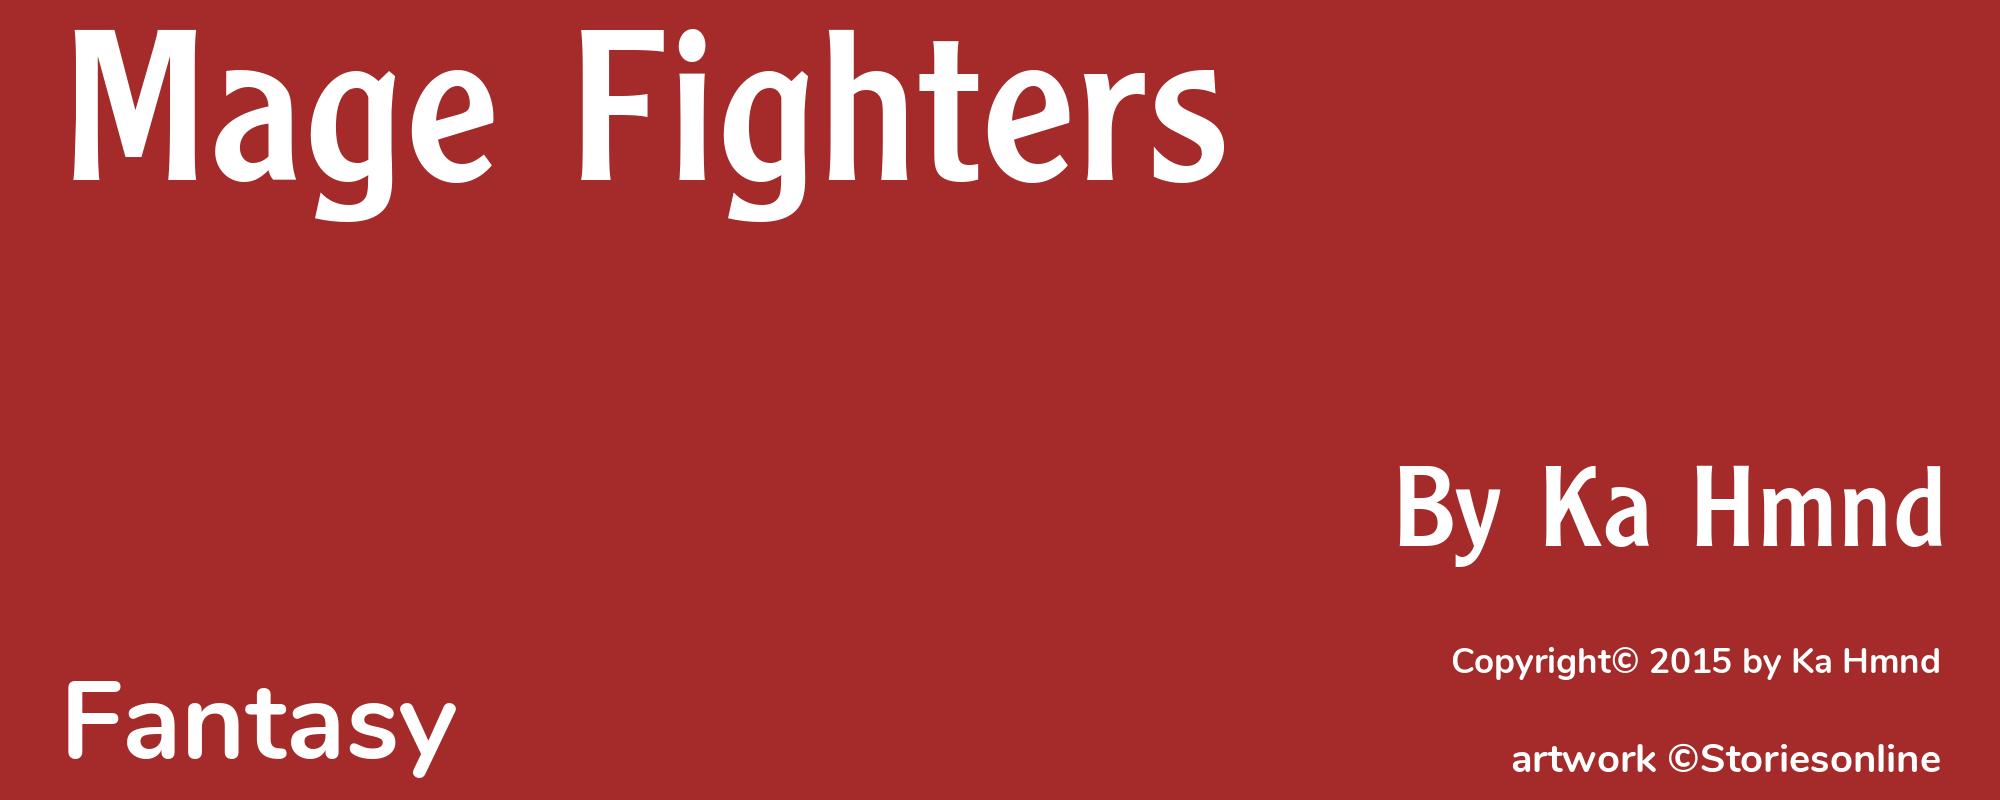 Mage Fighters - Cover